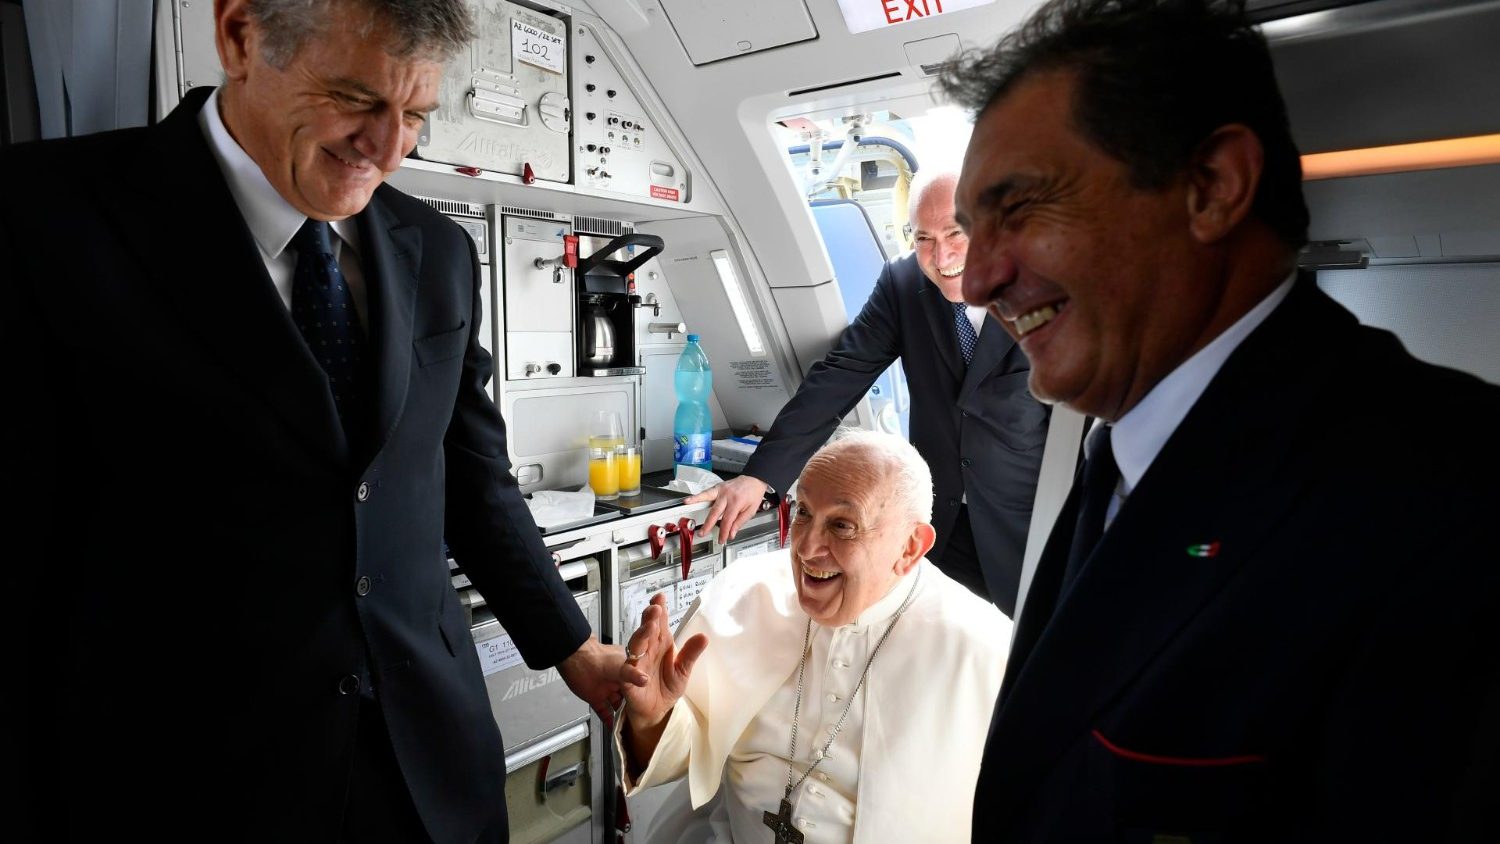 Pope Francis departs for Apostolic Journey to Marseille